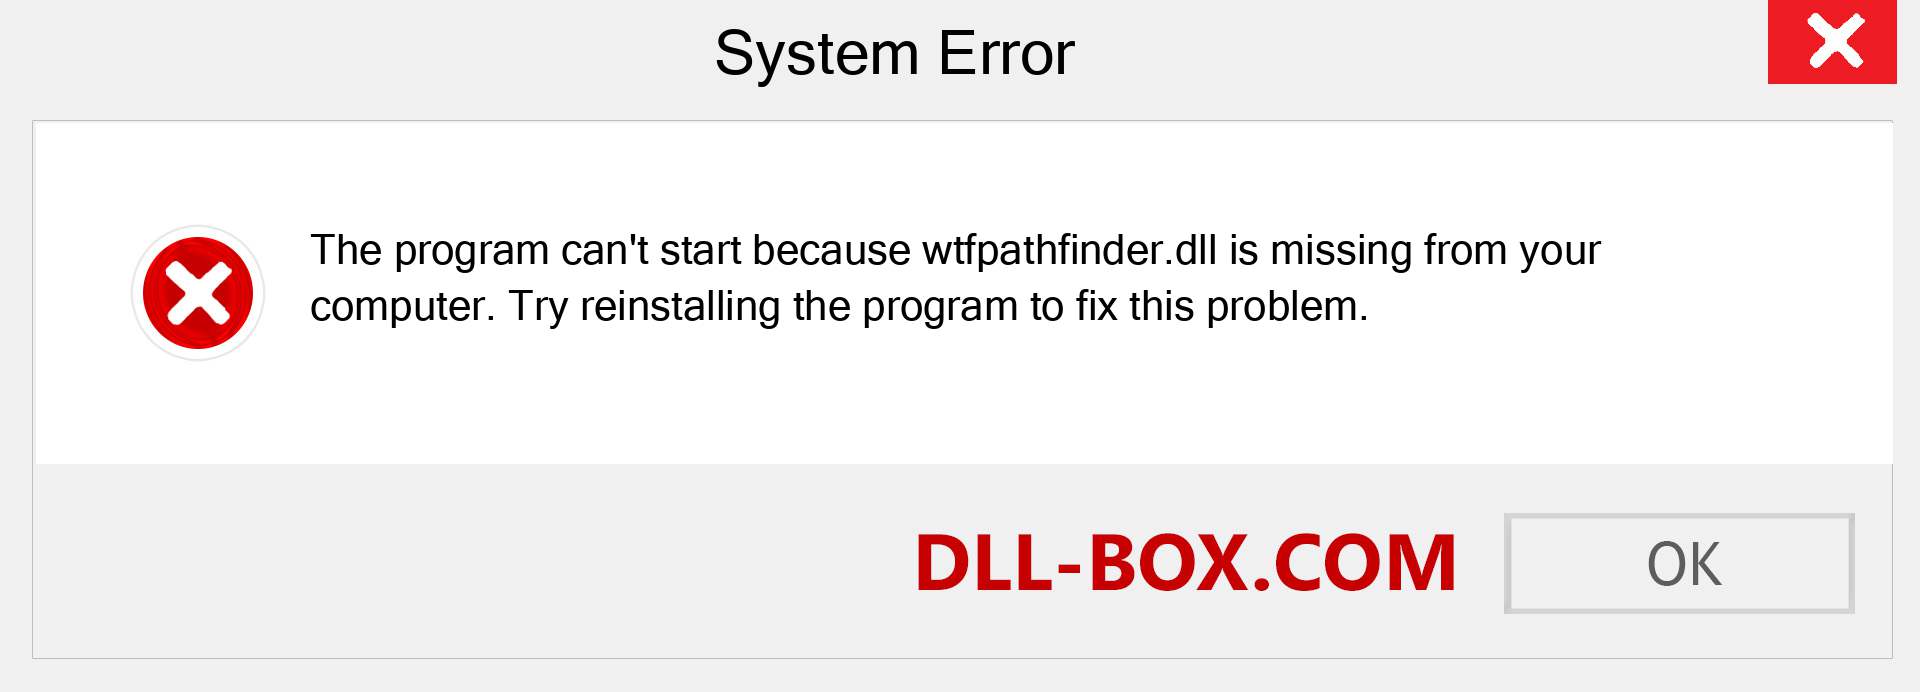  wtfpathfinder.dll file is missing?. Download for Windows 7, 8, 10 - Fix  wtfpathfinder dll Missing Error on Windows, photos, images